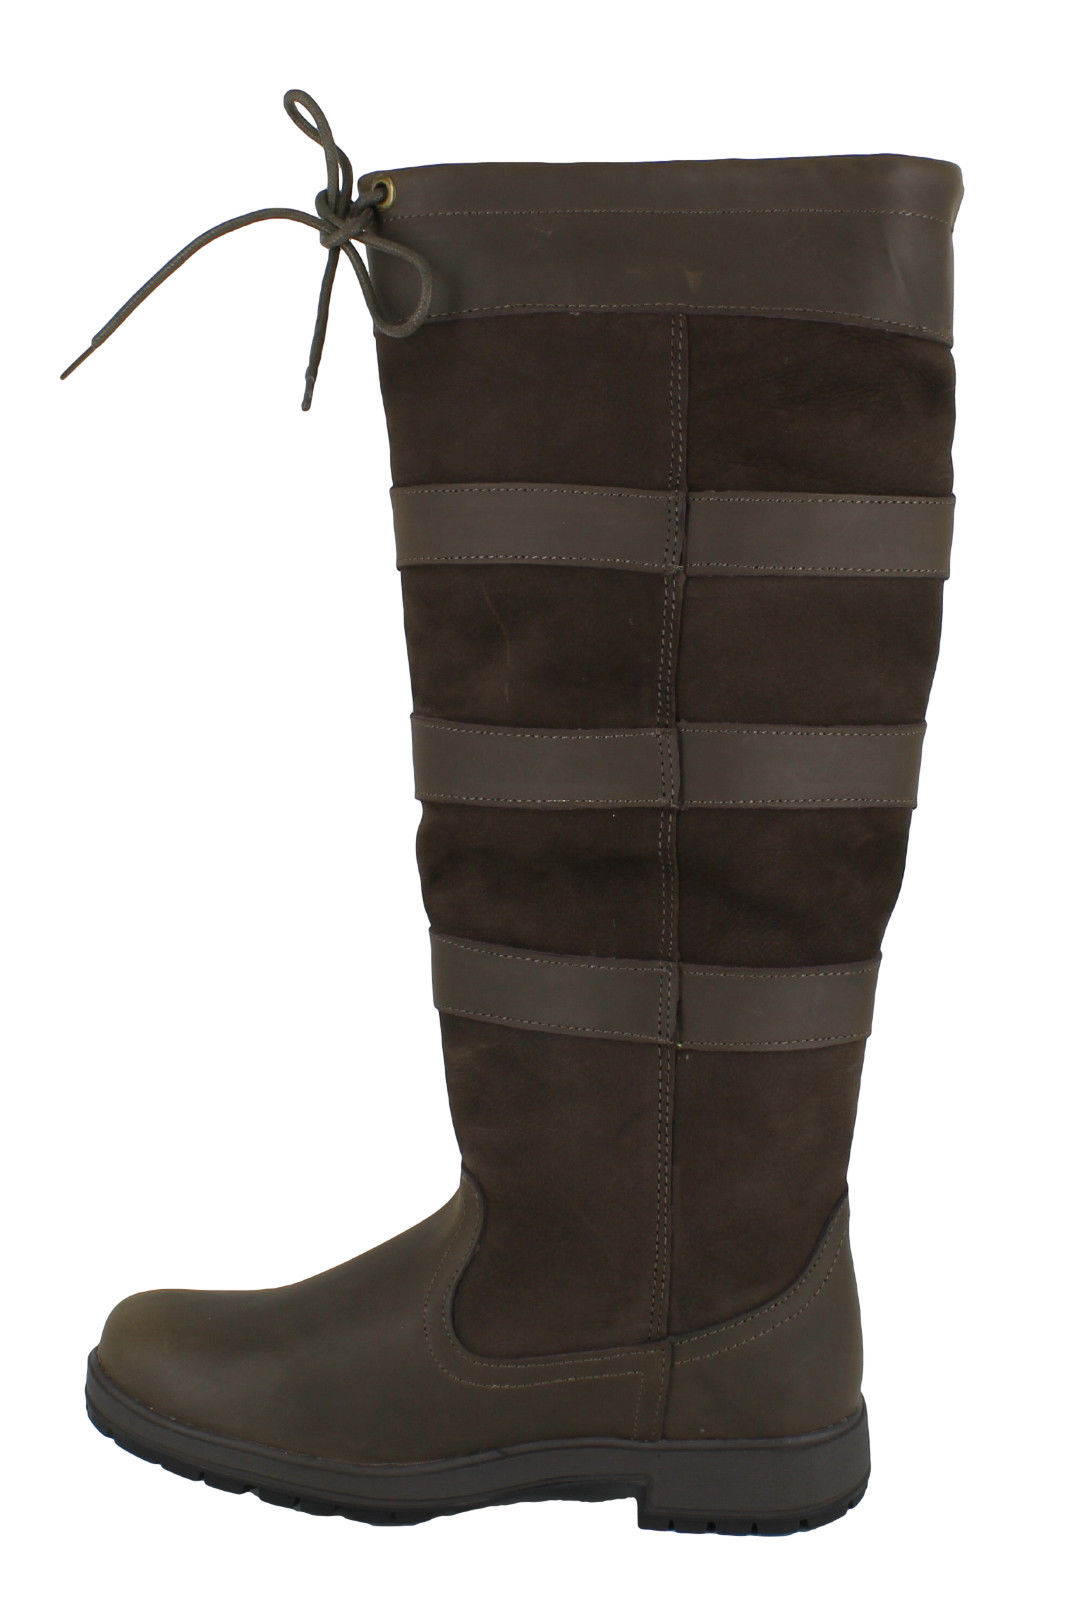 Riding Boots \u0026 Accessories WOMENS Wyre 